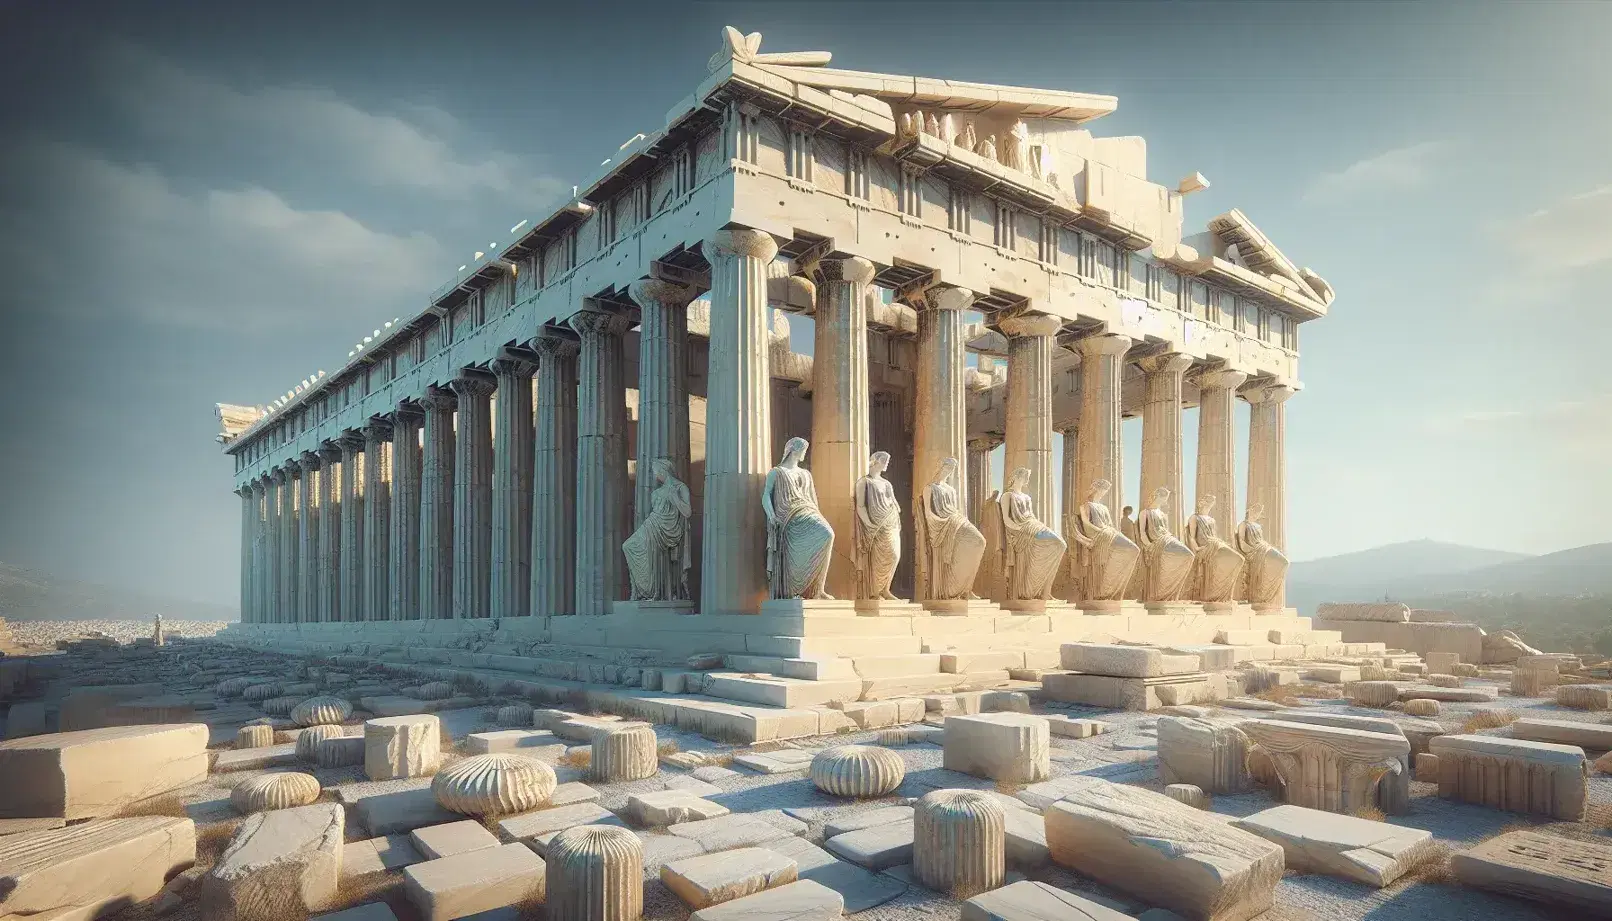 Reconstruction of the Acropolis of Athens with the Parthenon and the Erechtheion with the Caryatids, blue sky and ancient olive trees.